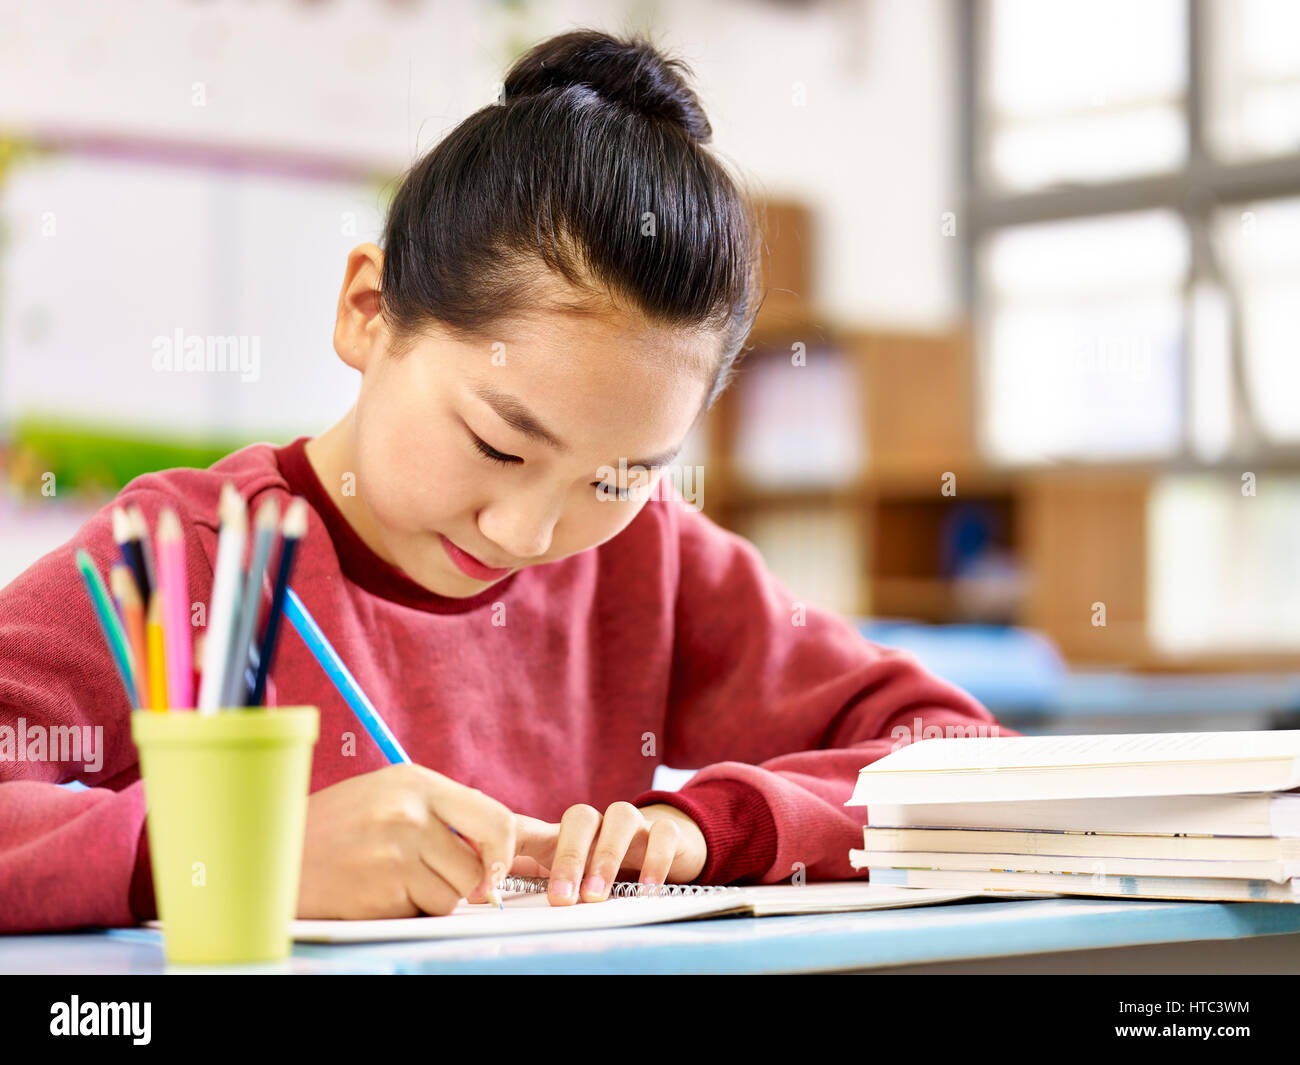 asian primary school student studying or doing homework in classroom. Stock Photo